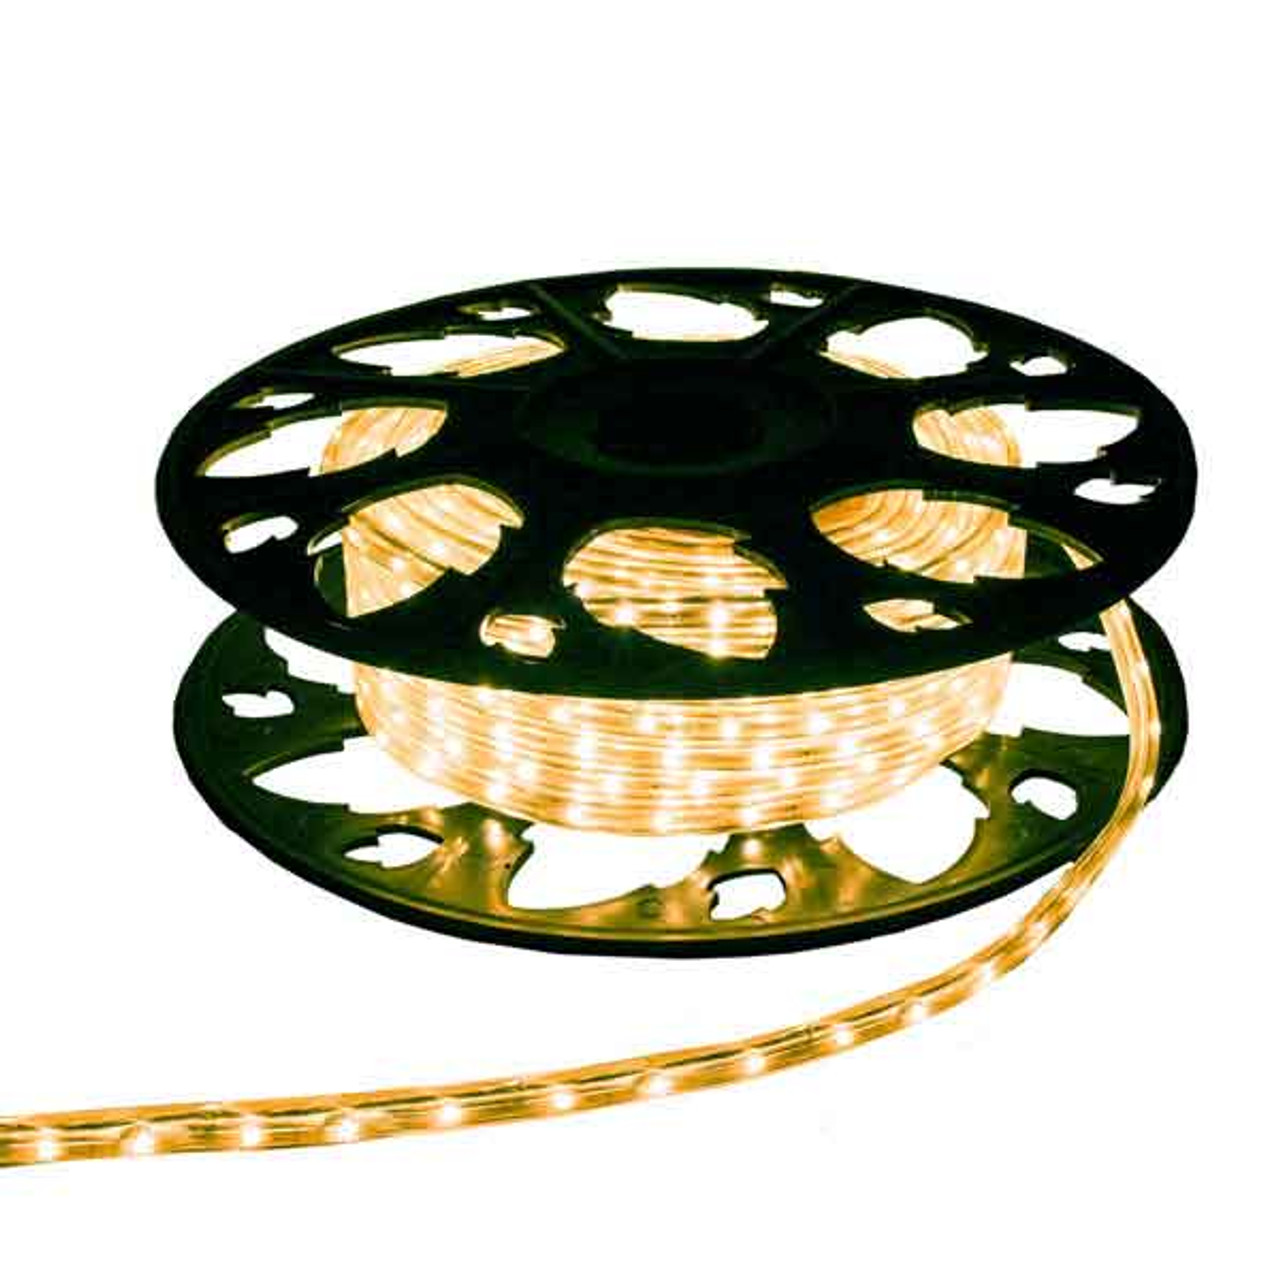 SMD CROWN Flexible Flat Rope Light (206SMD)